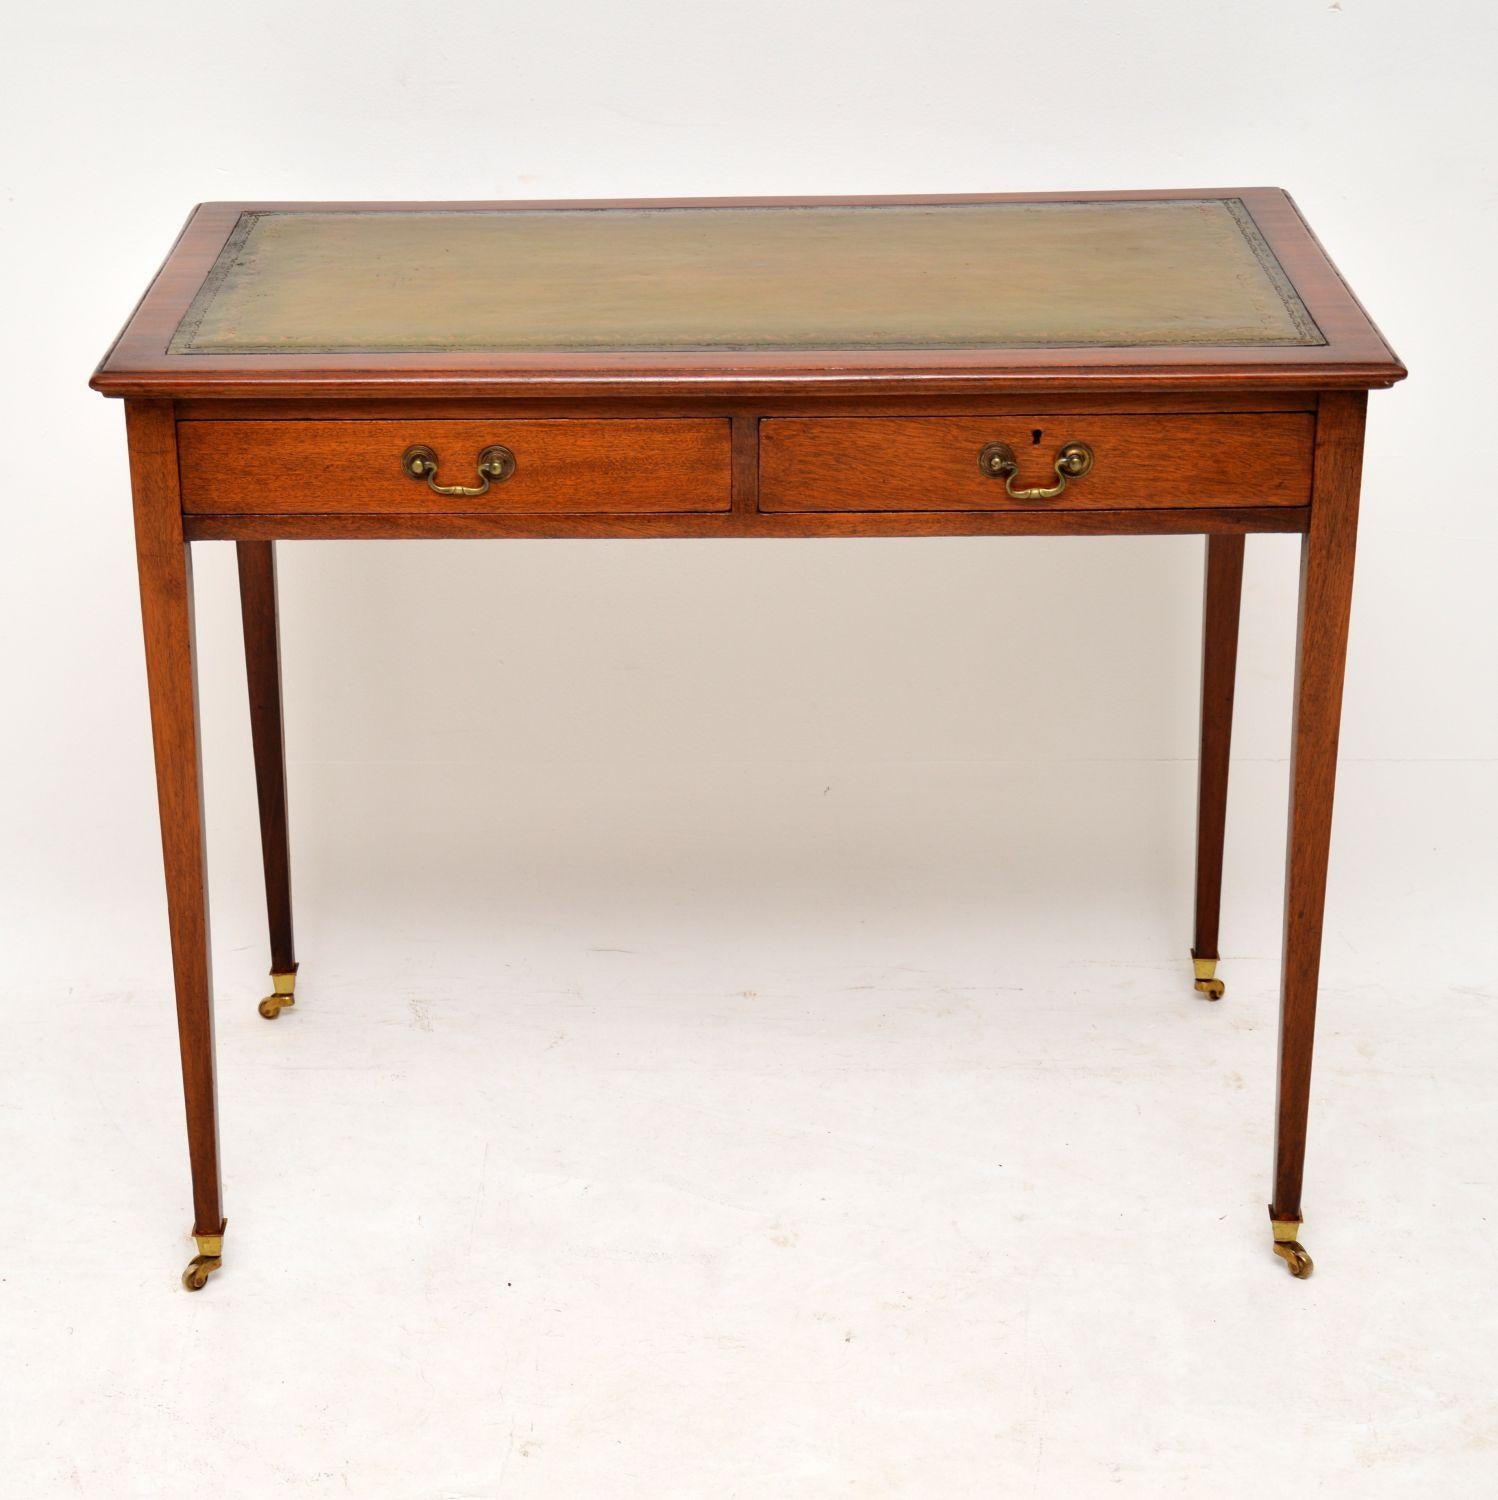 Very elegant smallish leather top writing table in mahogany and with a polished back. It’s late Victorian from circa 1890-1900 period and is in excellent condition. The writing surface is hand tooled and a faded green color, with plenty of